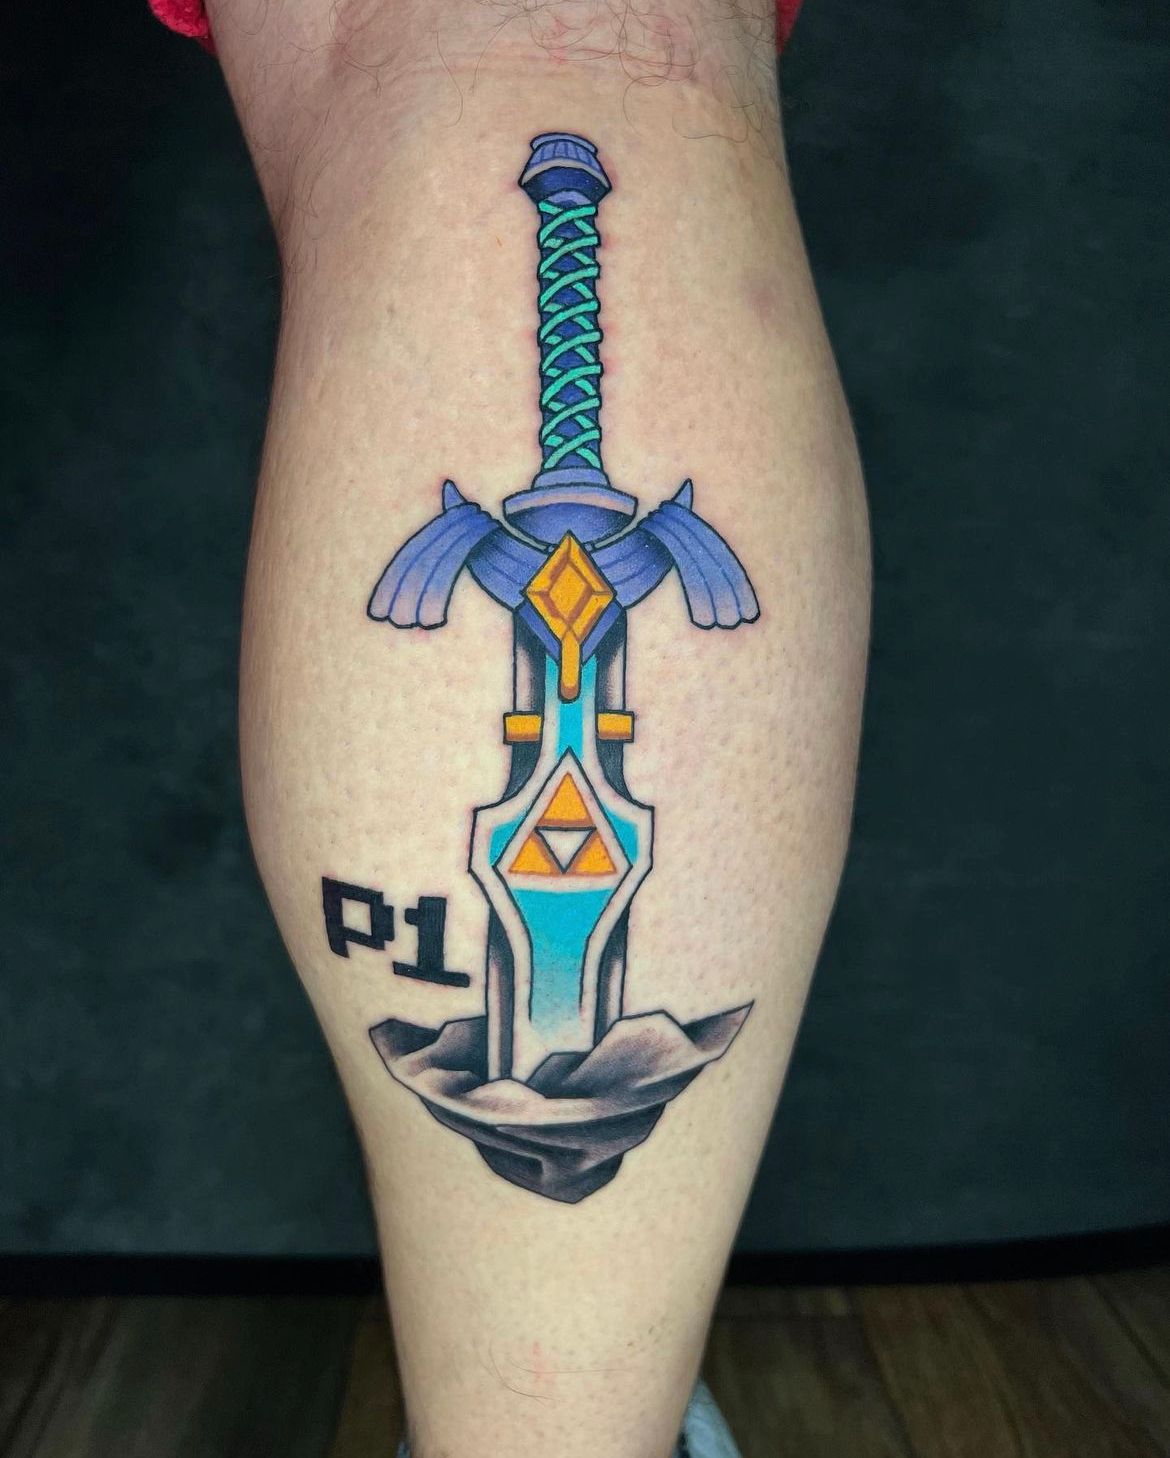 717 Tattoo  Player one player two Pixel tattoo by Jow  Facebook